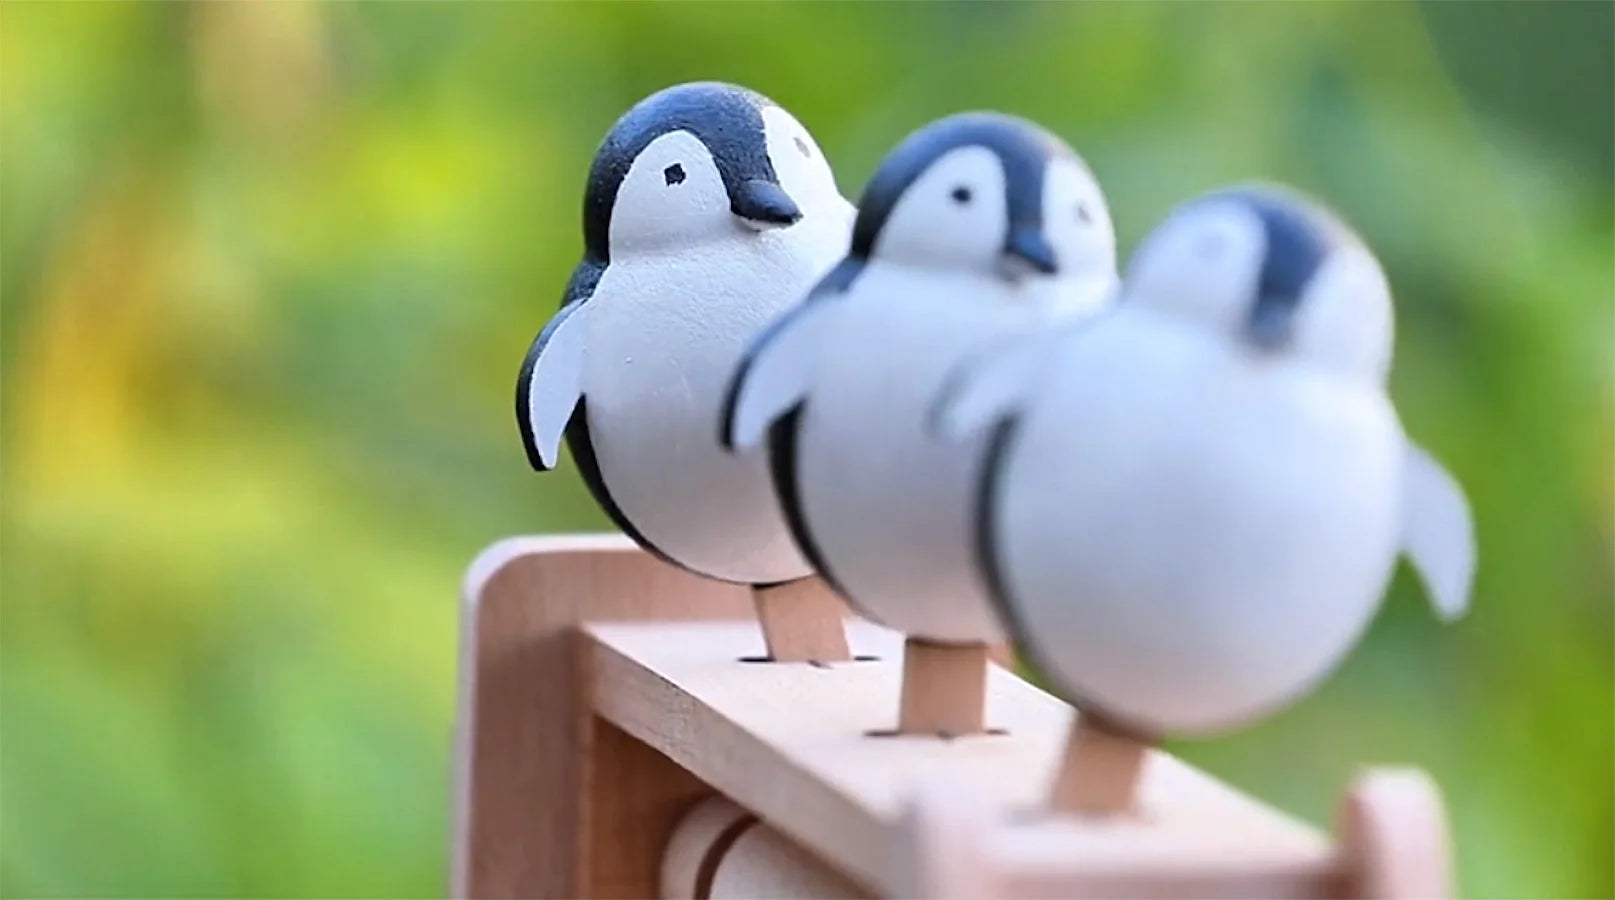 Handcrafted Electrically Swinging Wooden Penguin Toy - Mike Uncle